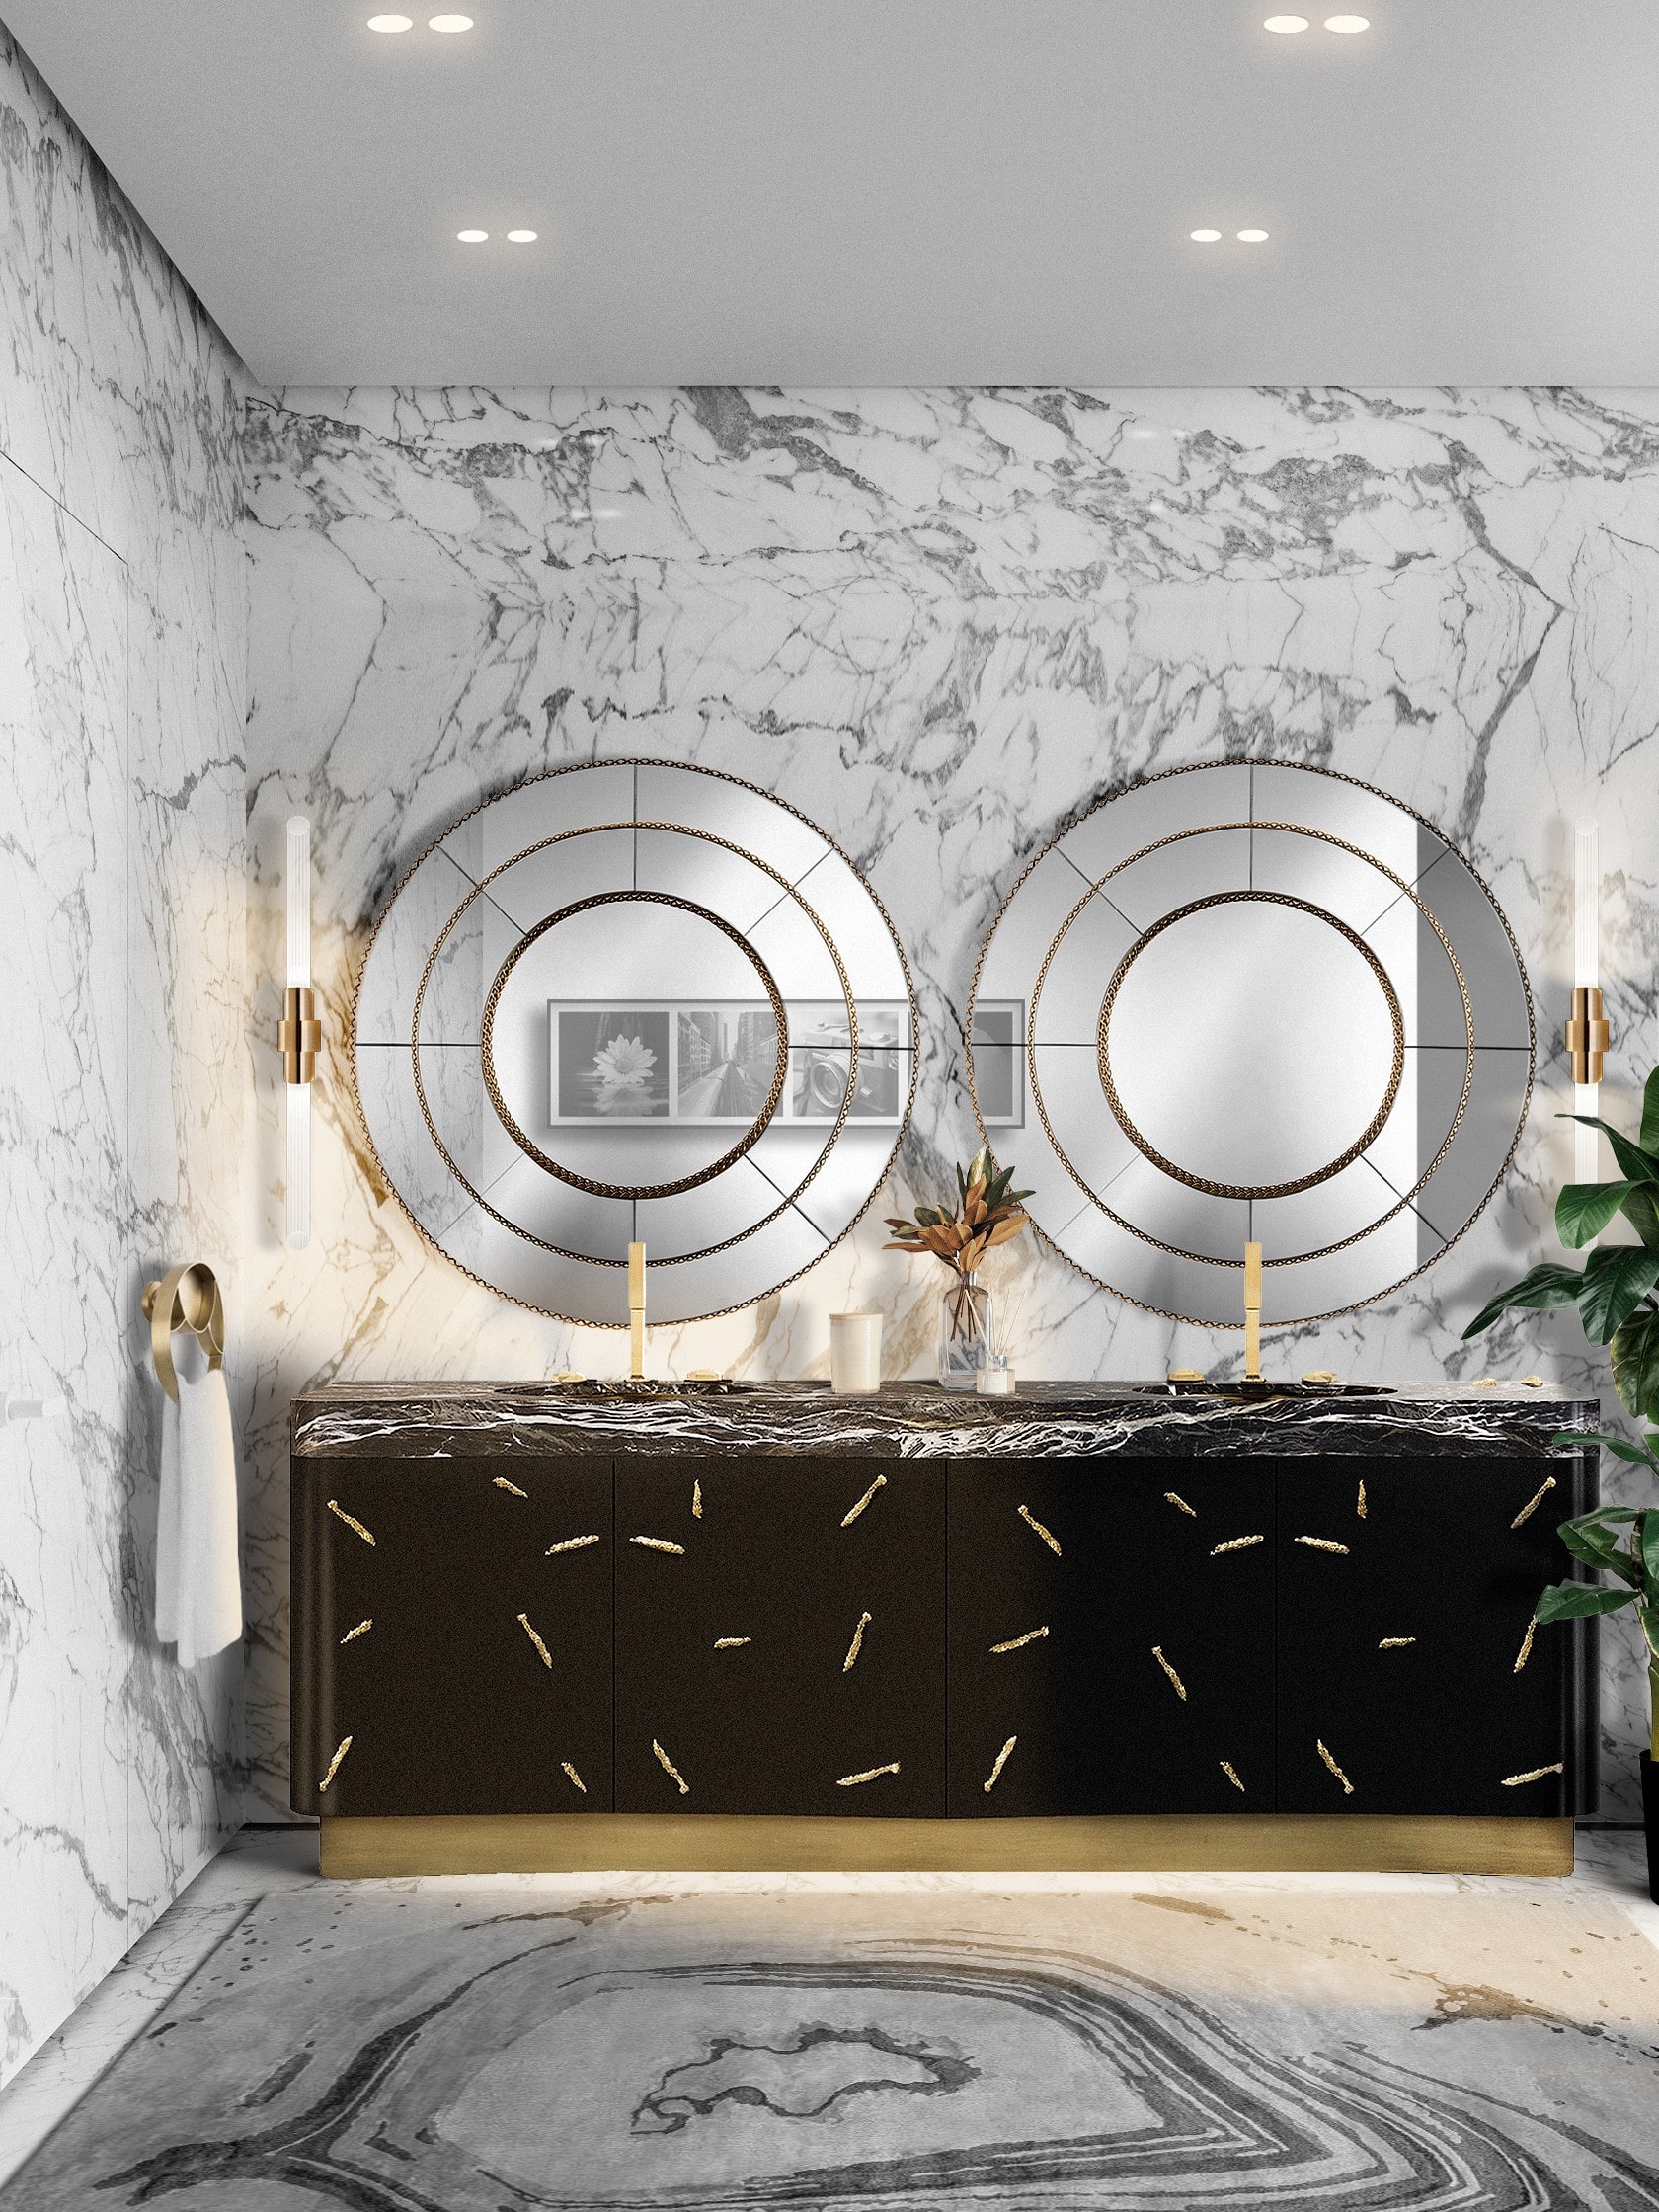 Modern Interior Design Made Of Old Plated Brass - Home'Society